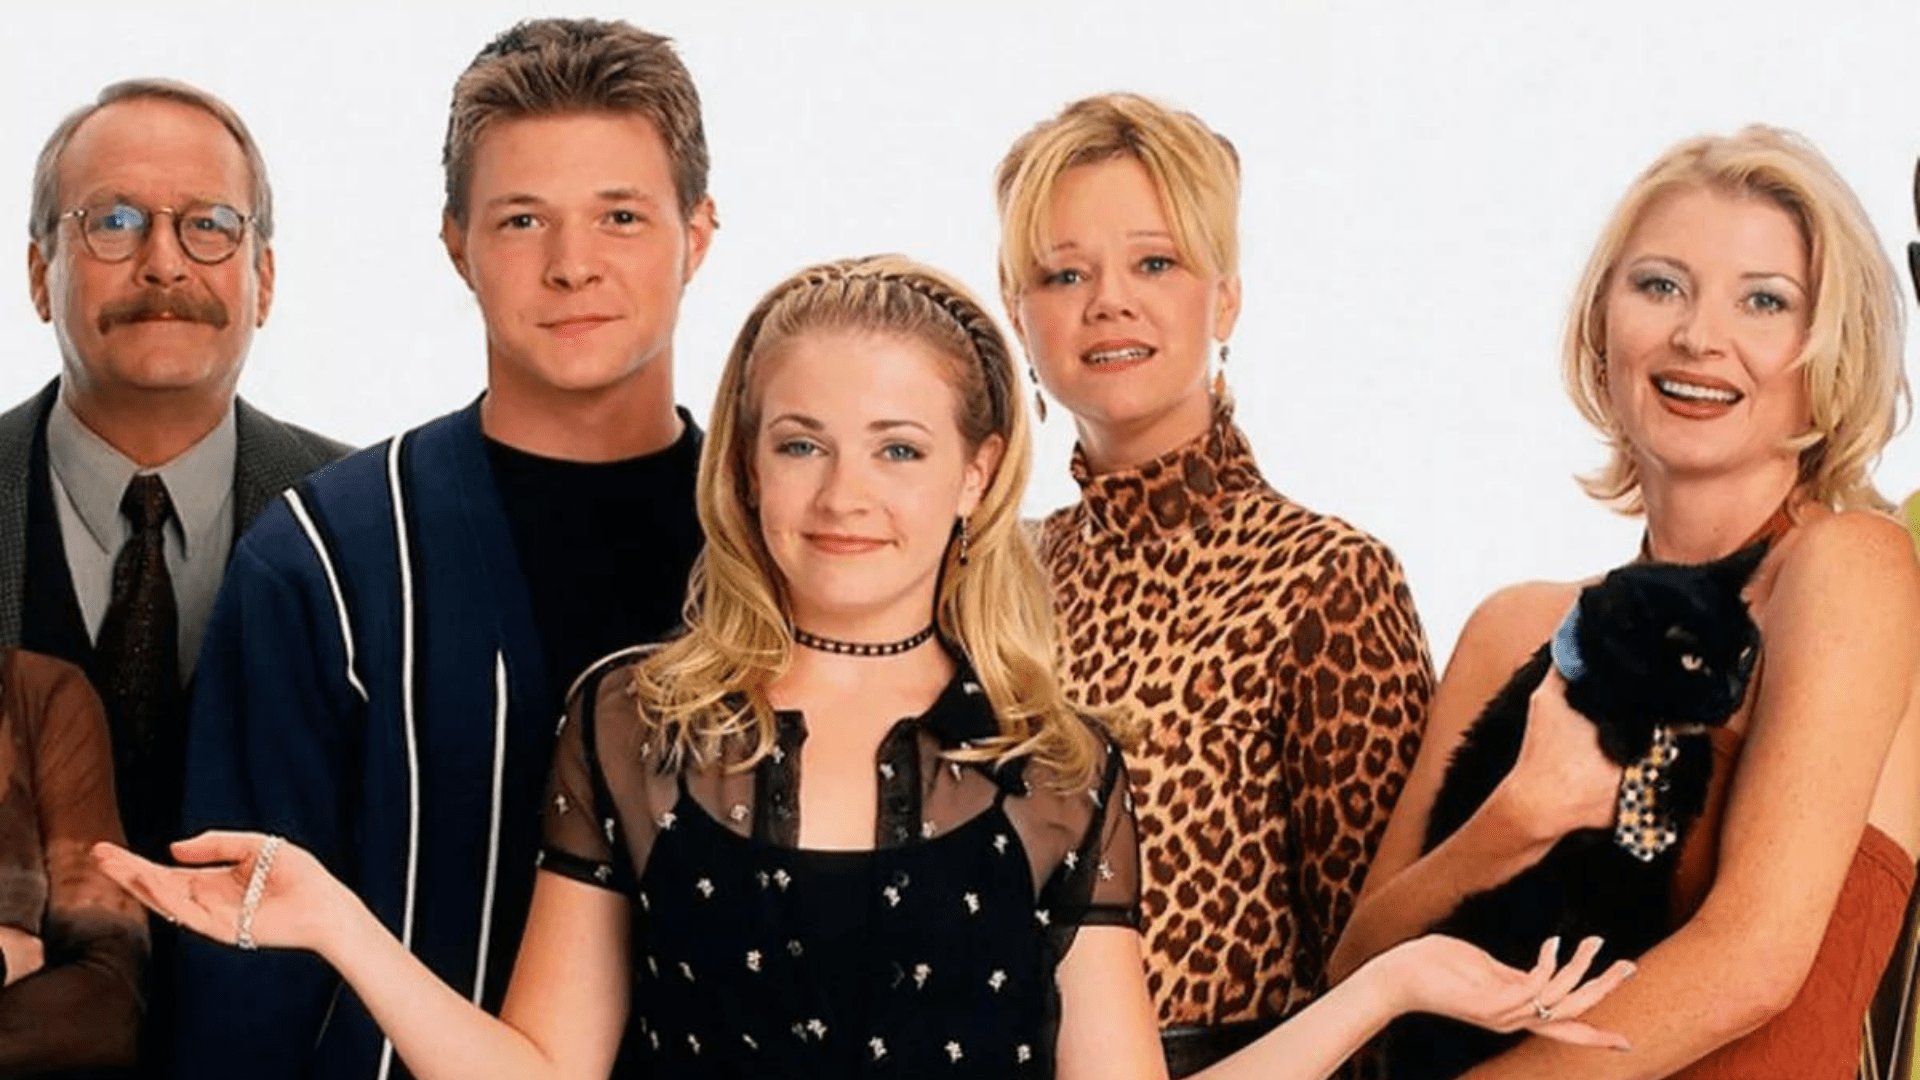 Sabrina The Teenage Witch Facts - 82 Sabrina The Teenage Witch Facts That Every 90s Kid Should Know